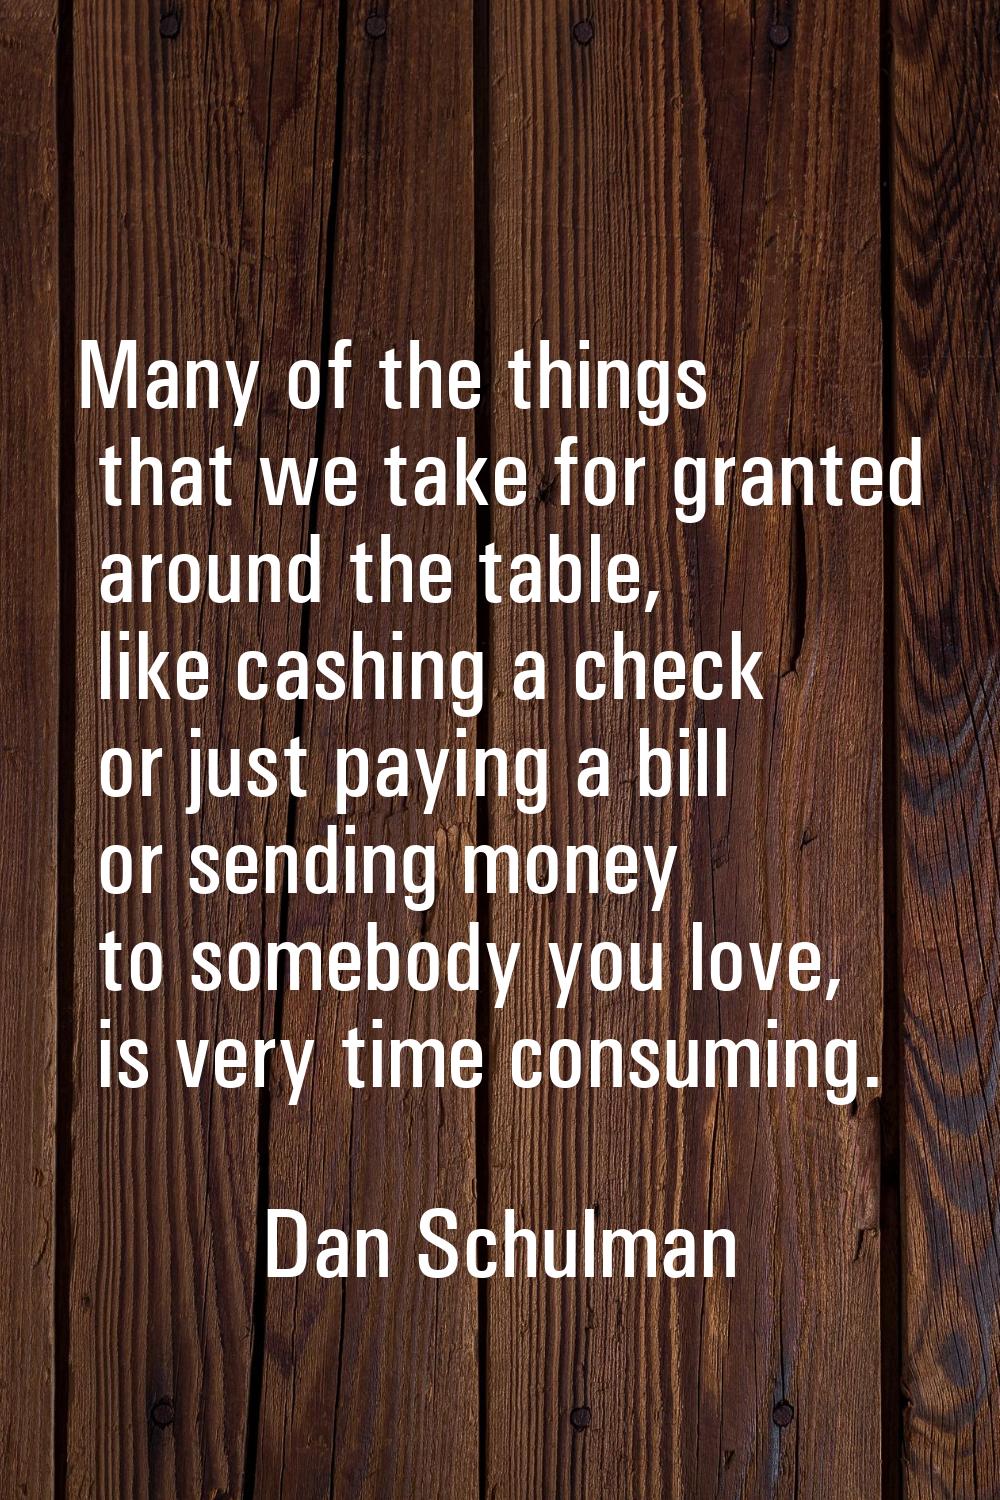 Many of the things that we take for granted around the table, like cashing a check or just paying a